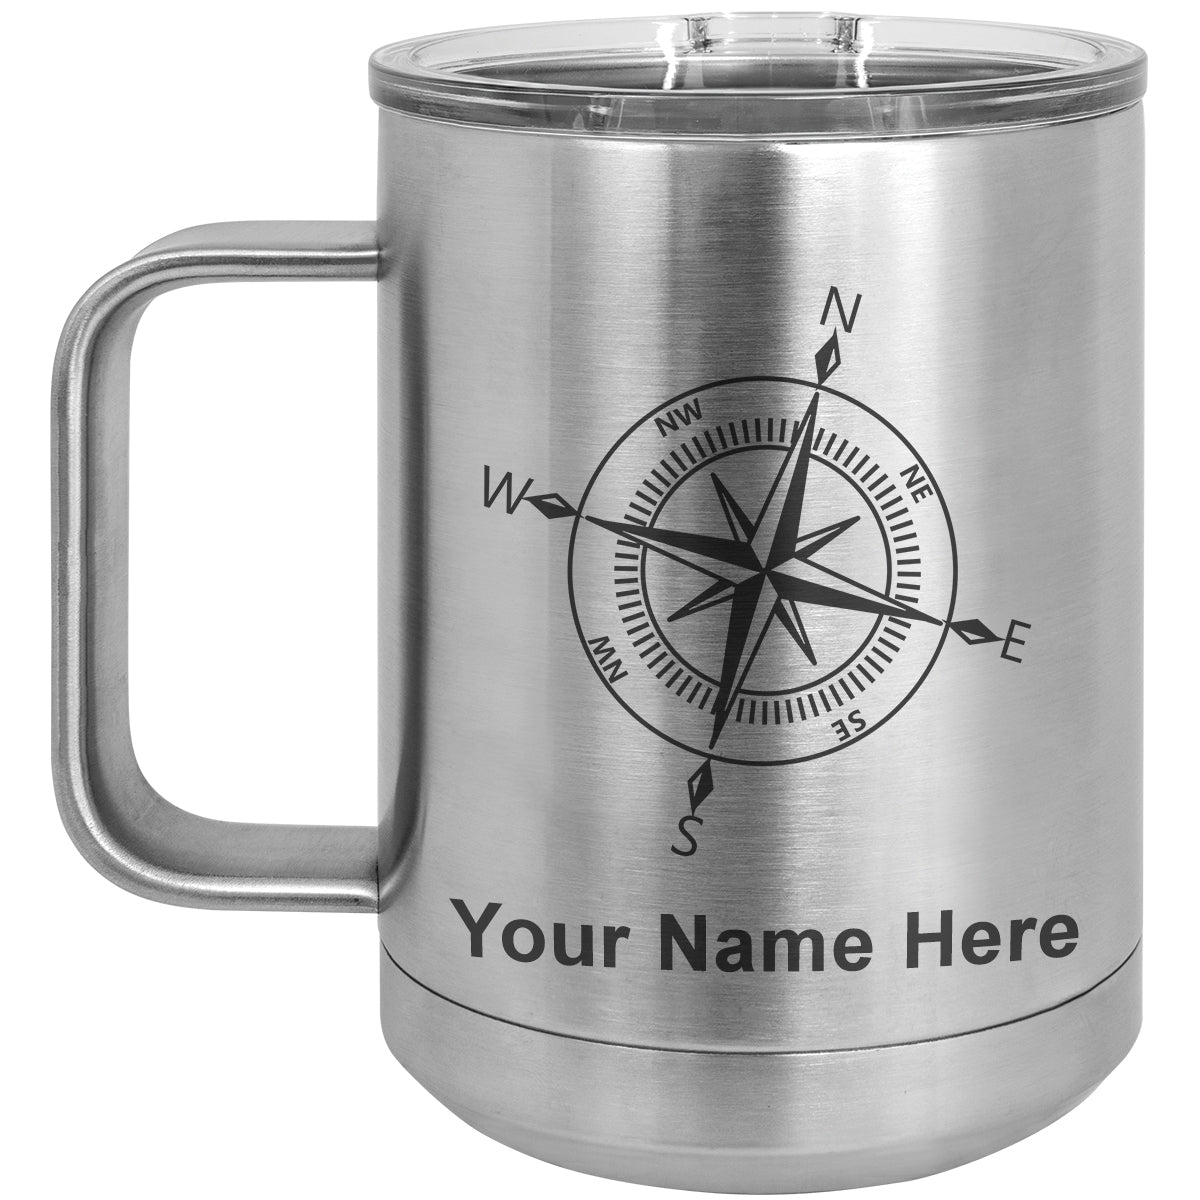 Visol Personalized Stainless Steel Coffee Mug with